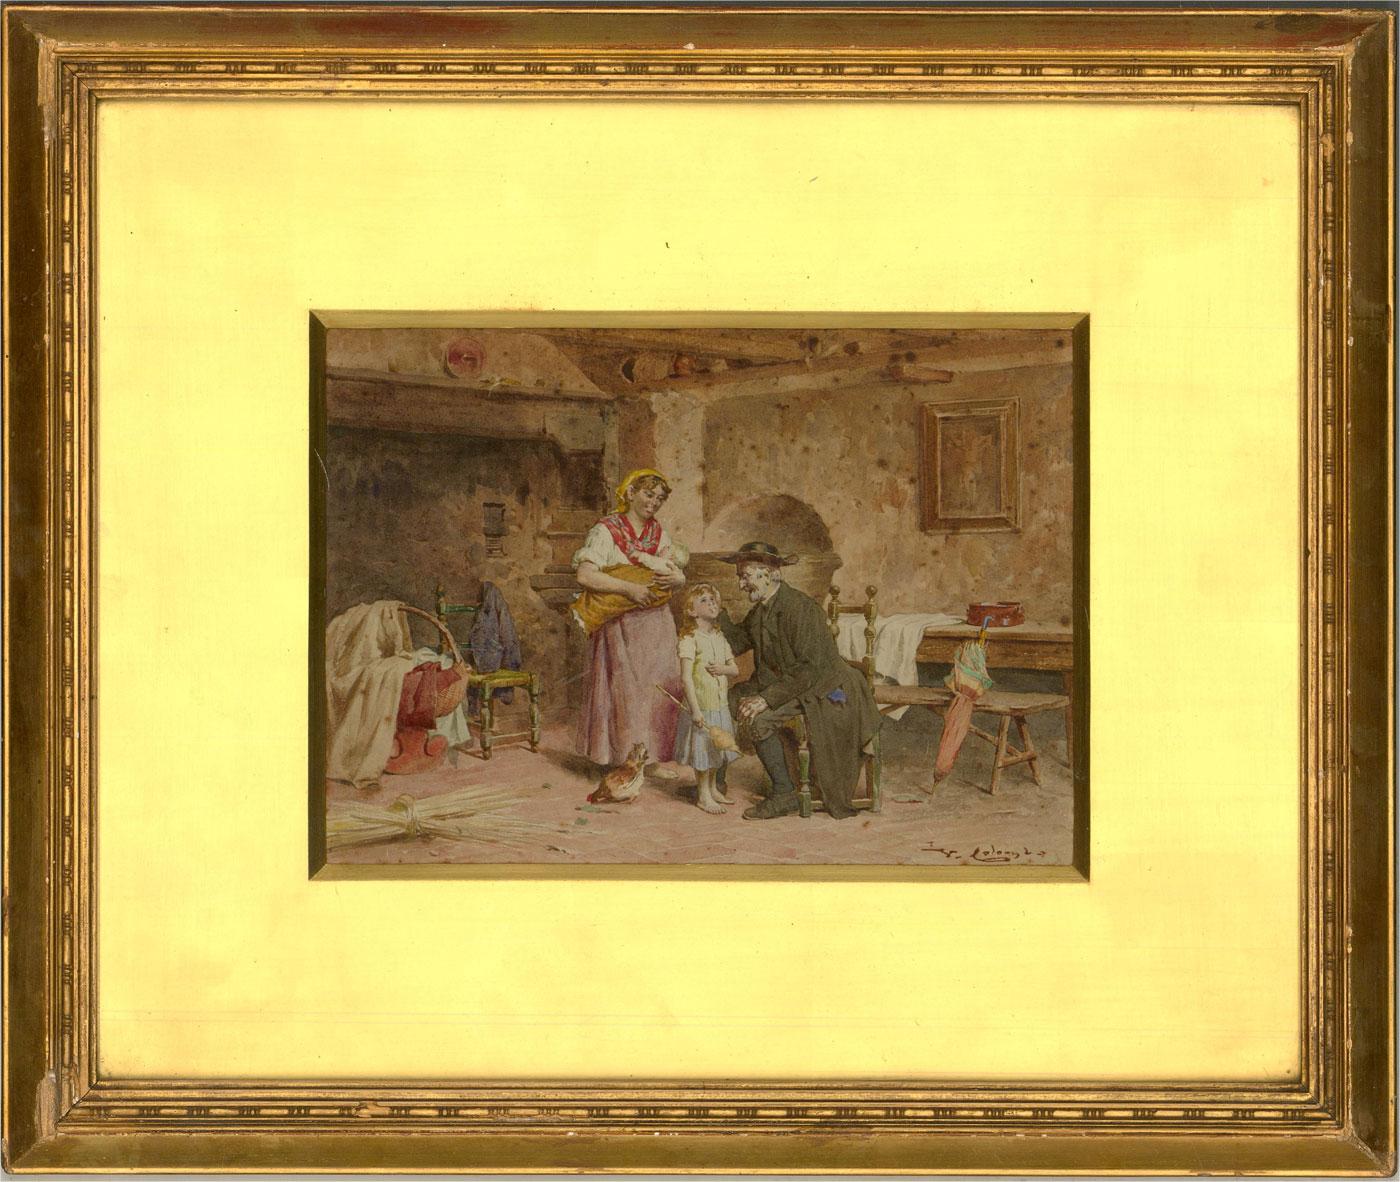 An interior scene depicting a priest visiting a woman and her children. A painting of the crucifixion hangs on the wall, signifying the piety of this humble family. Meanwhile, the priest's umbrella which leans against the bench adds a note of